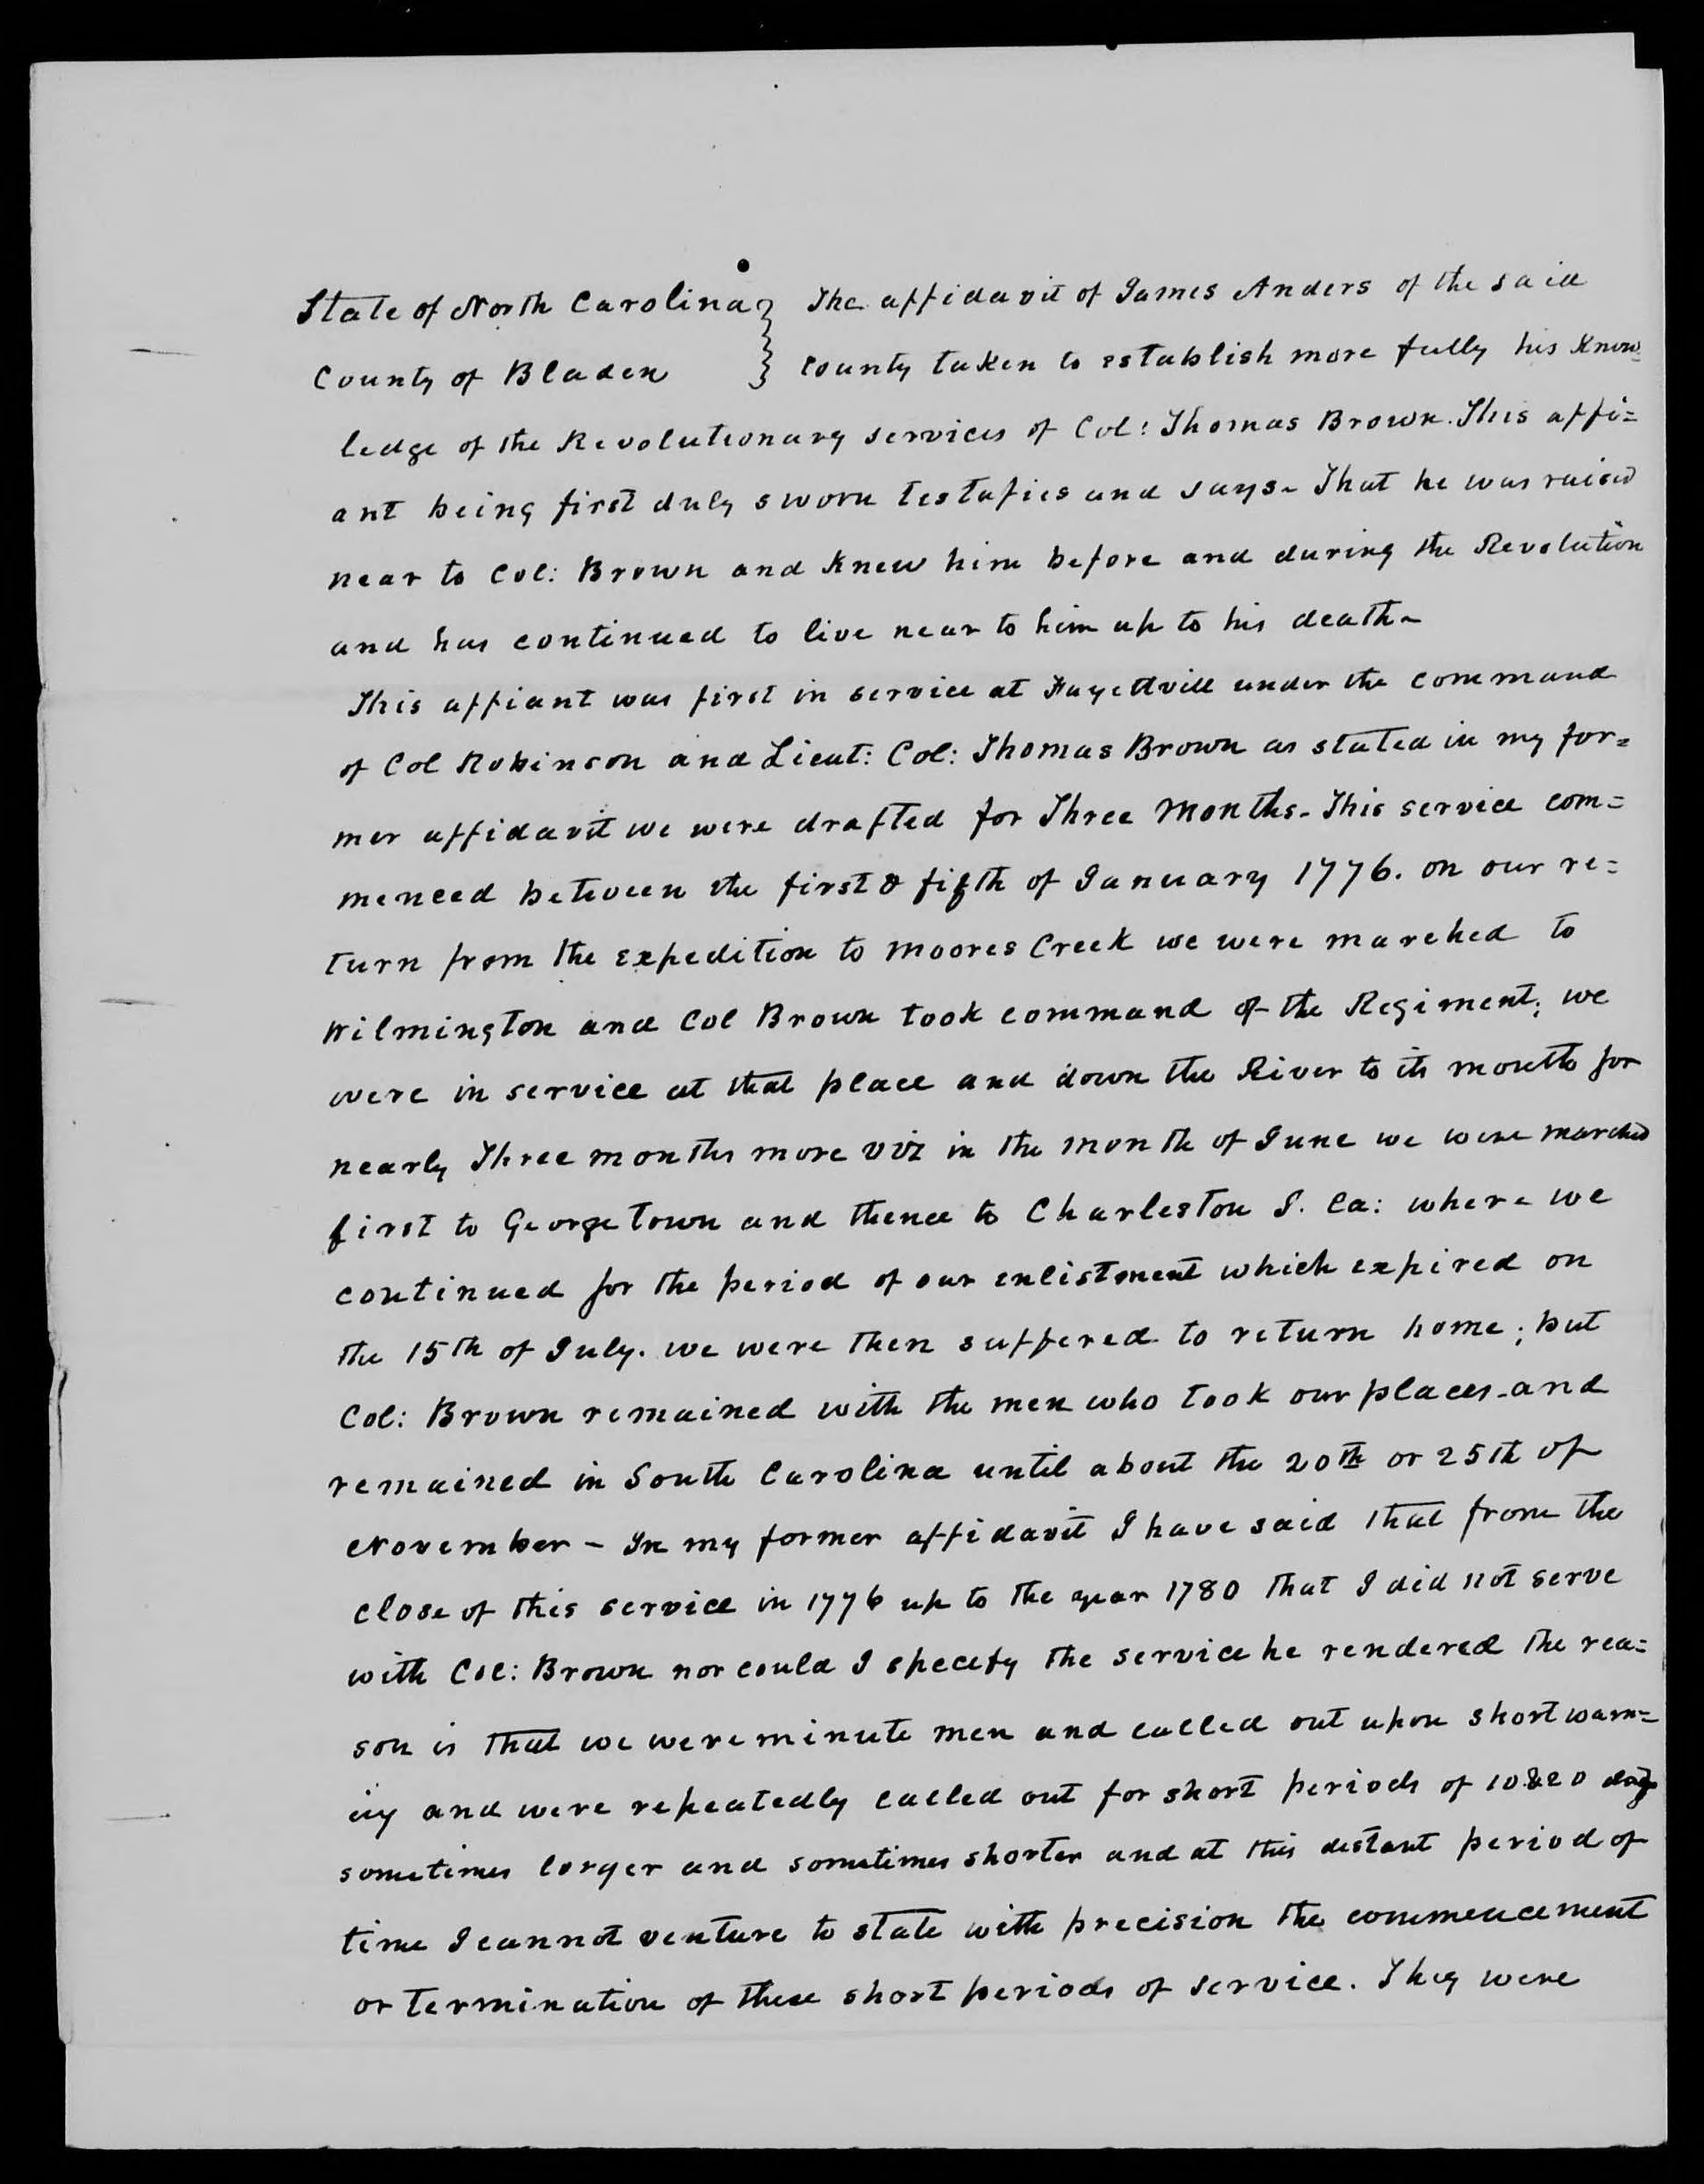 Affidavit of James Anders (amended) in support of a Pension Claim for Lucy Brown, 7 June 1839, page 1Affidavit of James Anders (amended) in support of a Pension Claim for Lucy Brown, 7 June 1839, page 1